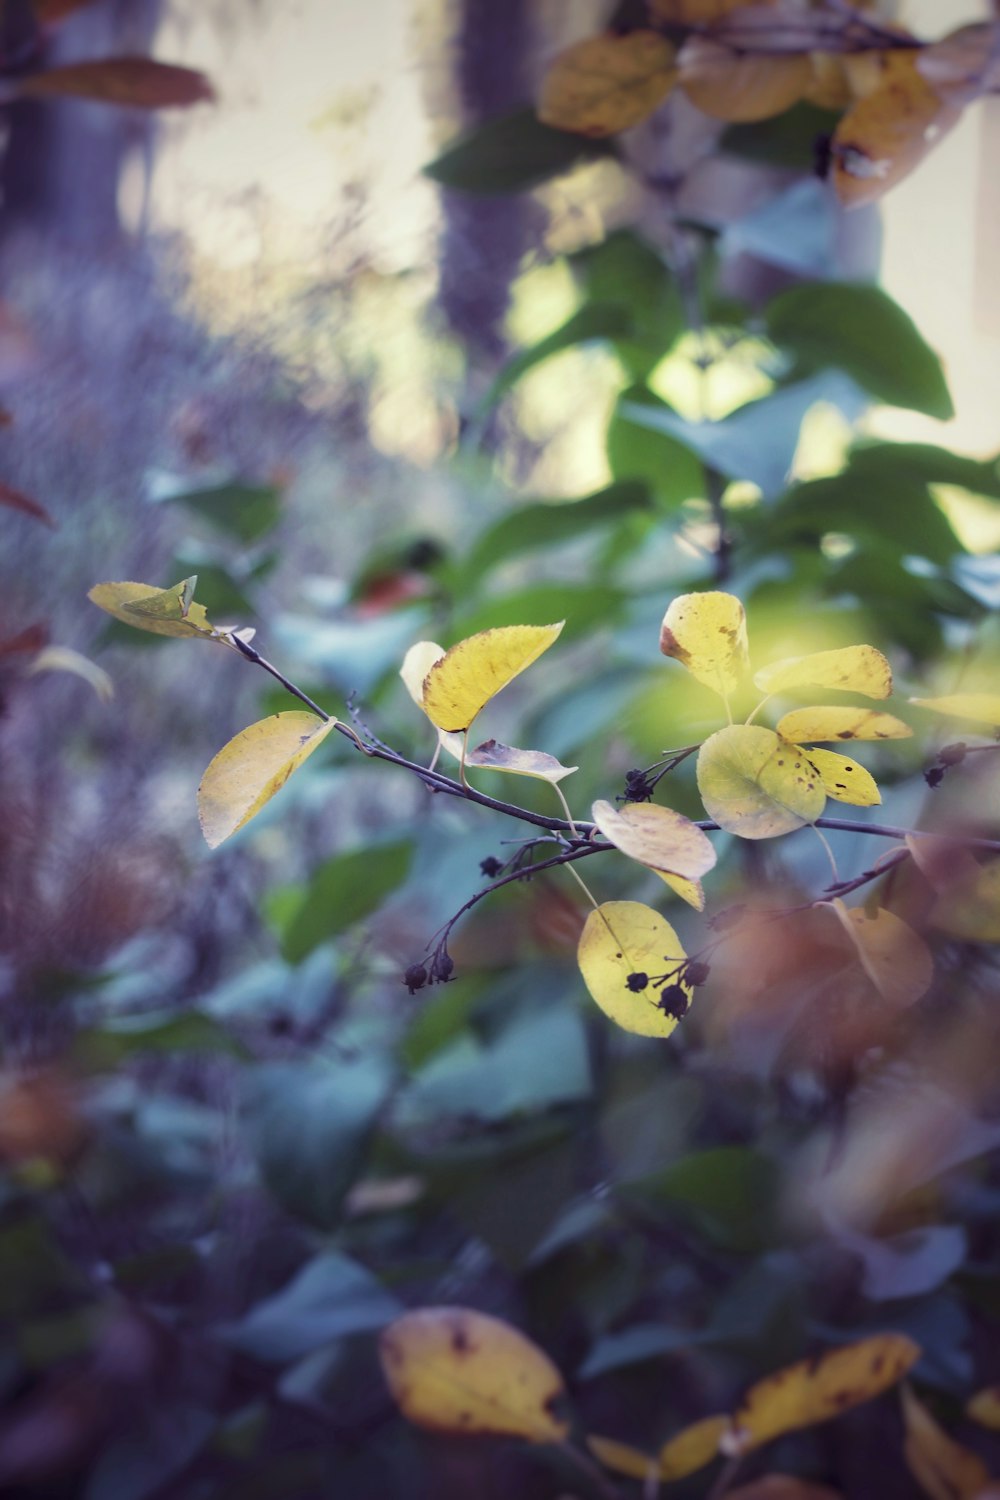 a close up of a tree branch with yellow leaves